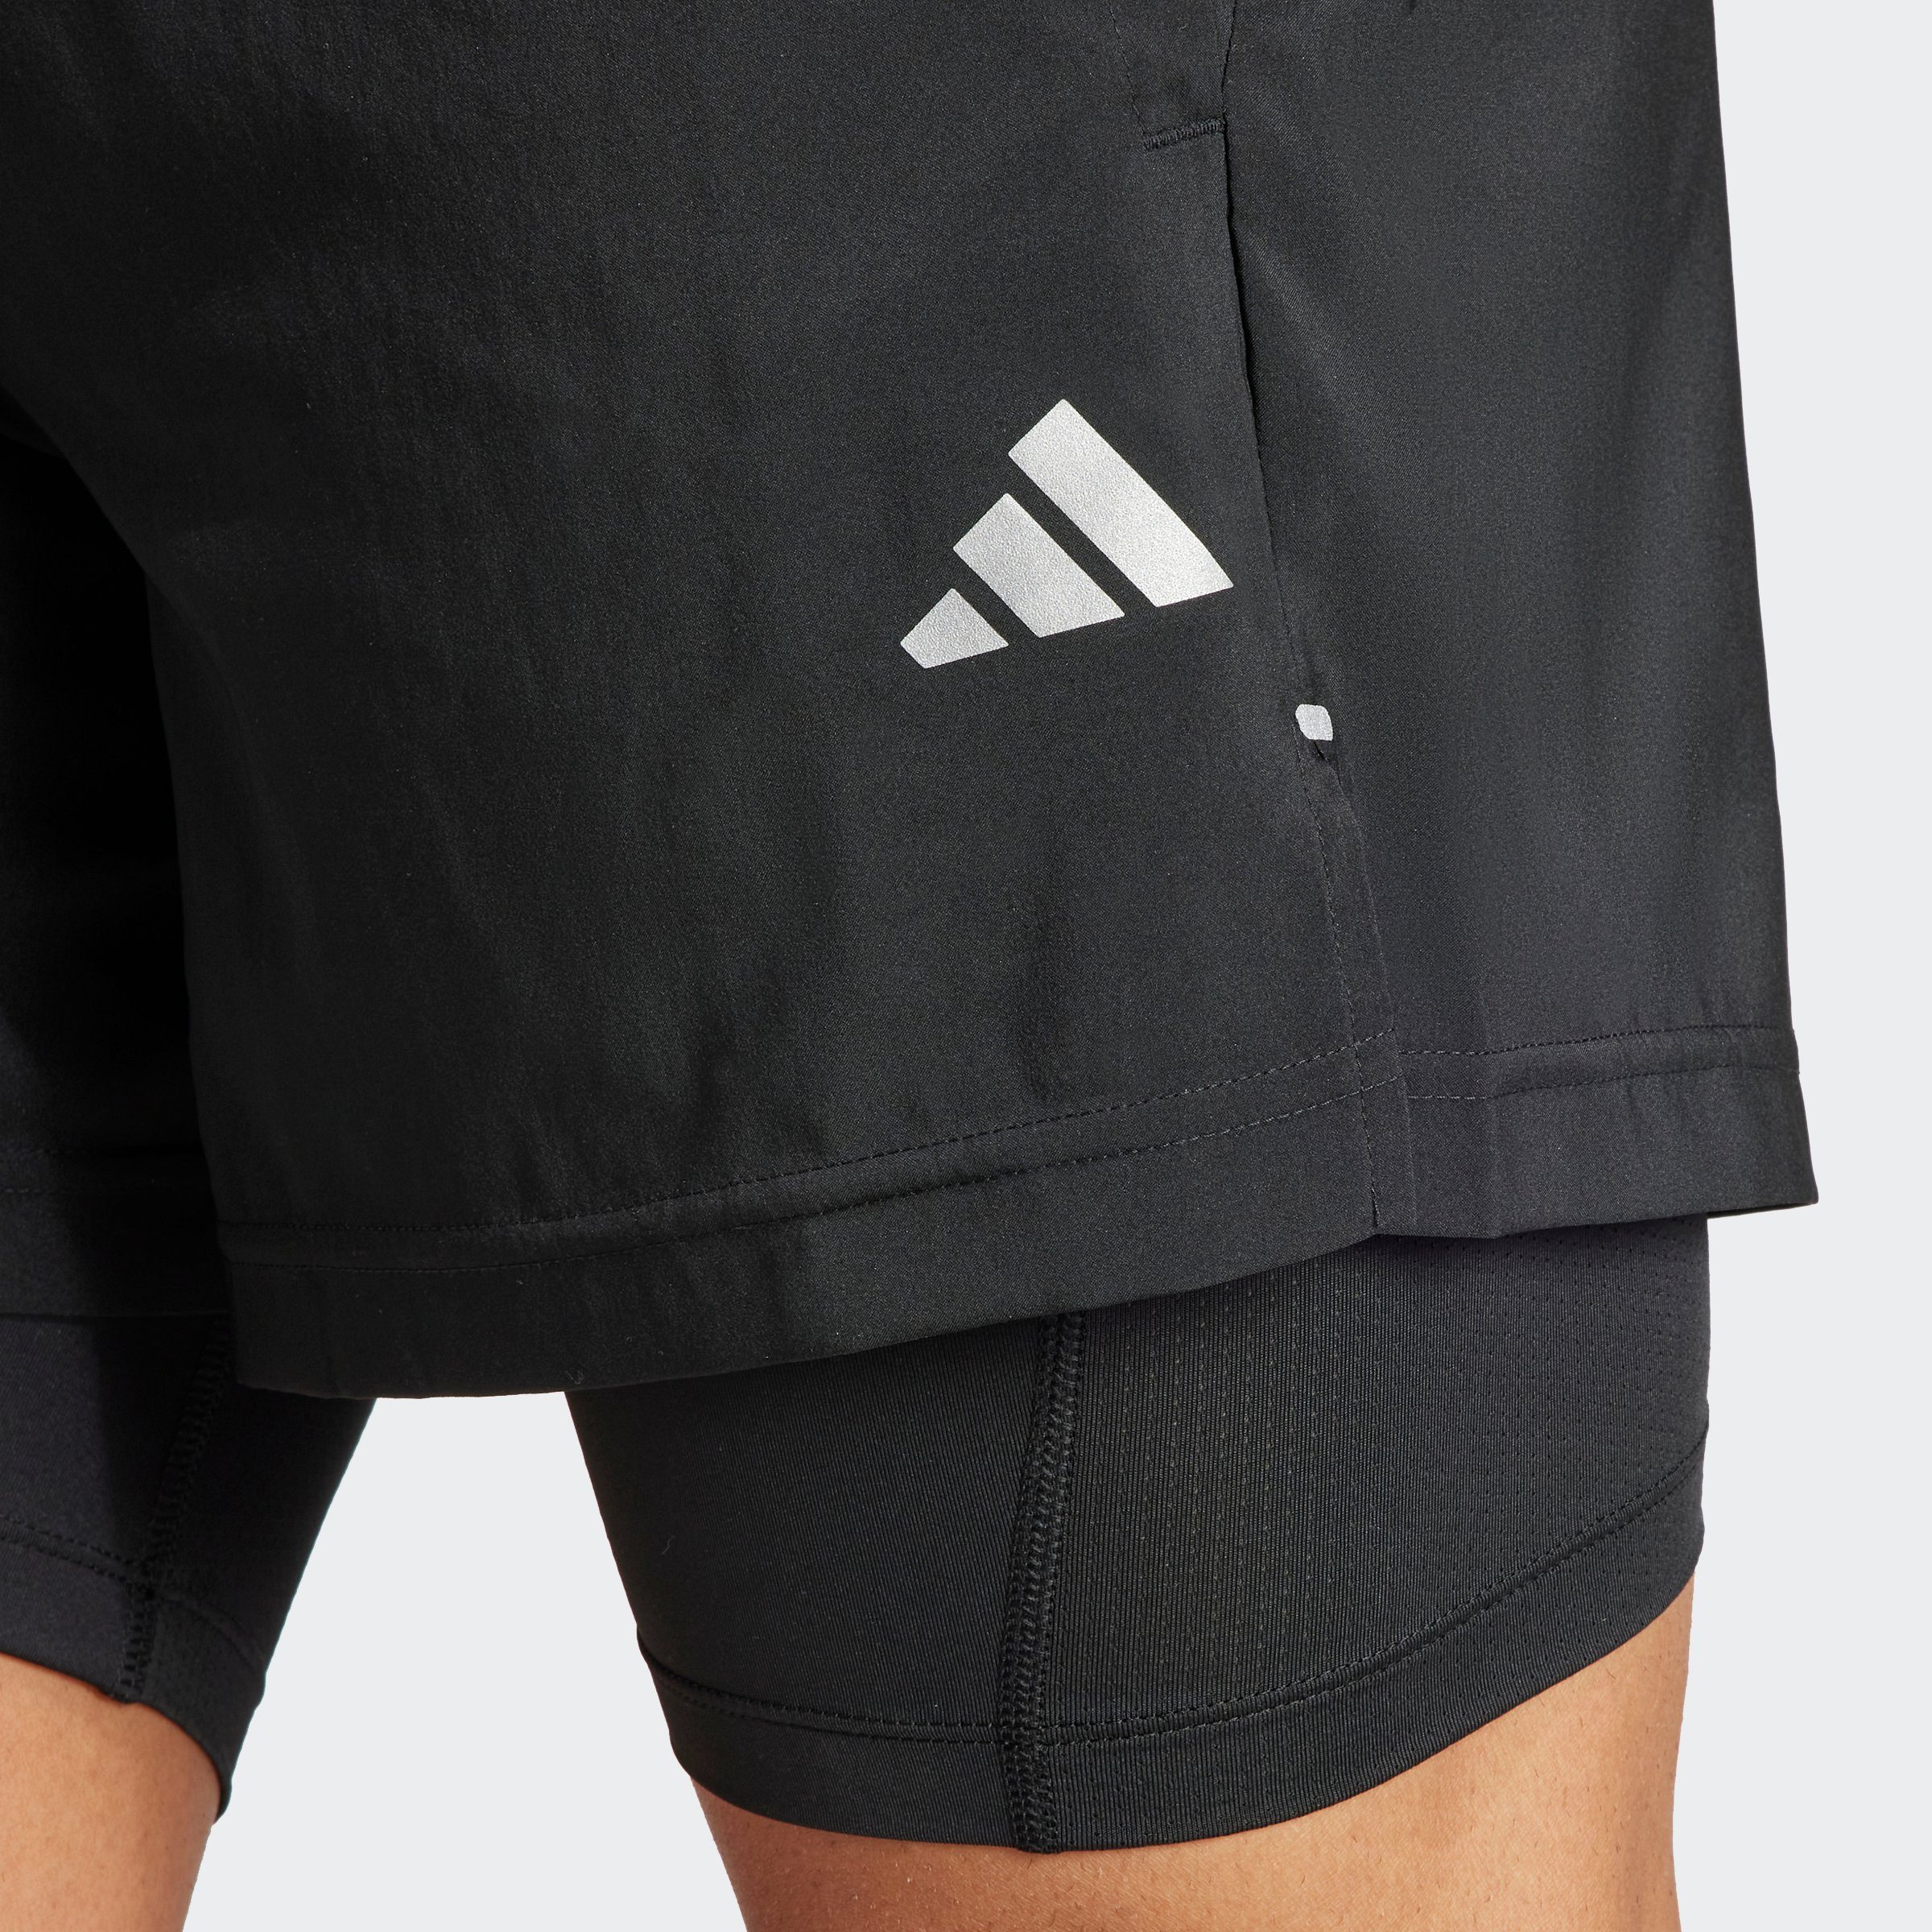 adidas Performance Short GYM+ WV 2in1 S (1-delig)